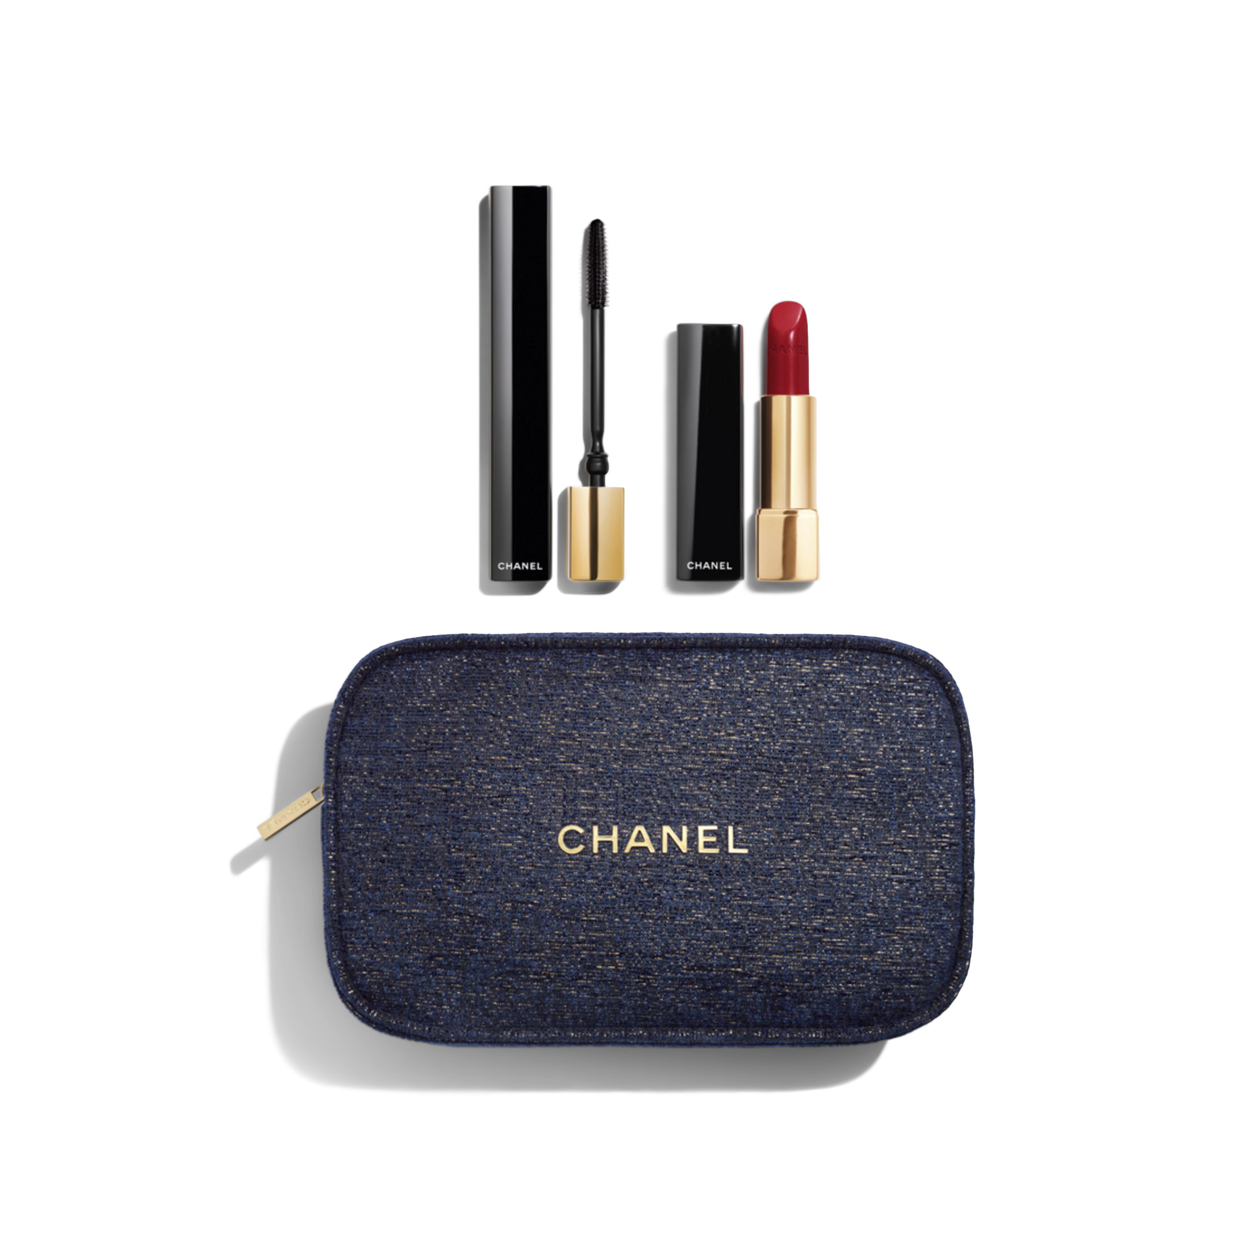 Chanel Makeup: Your Tried and True Staples? - Makeup and Beauty Blog